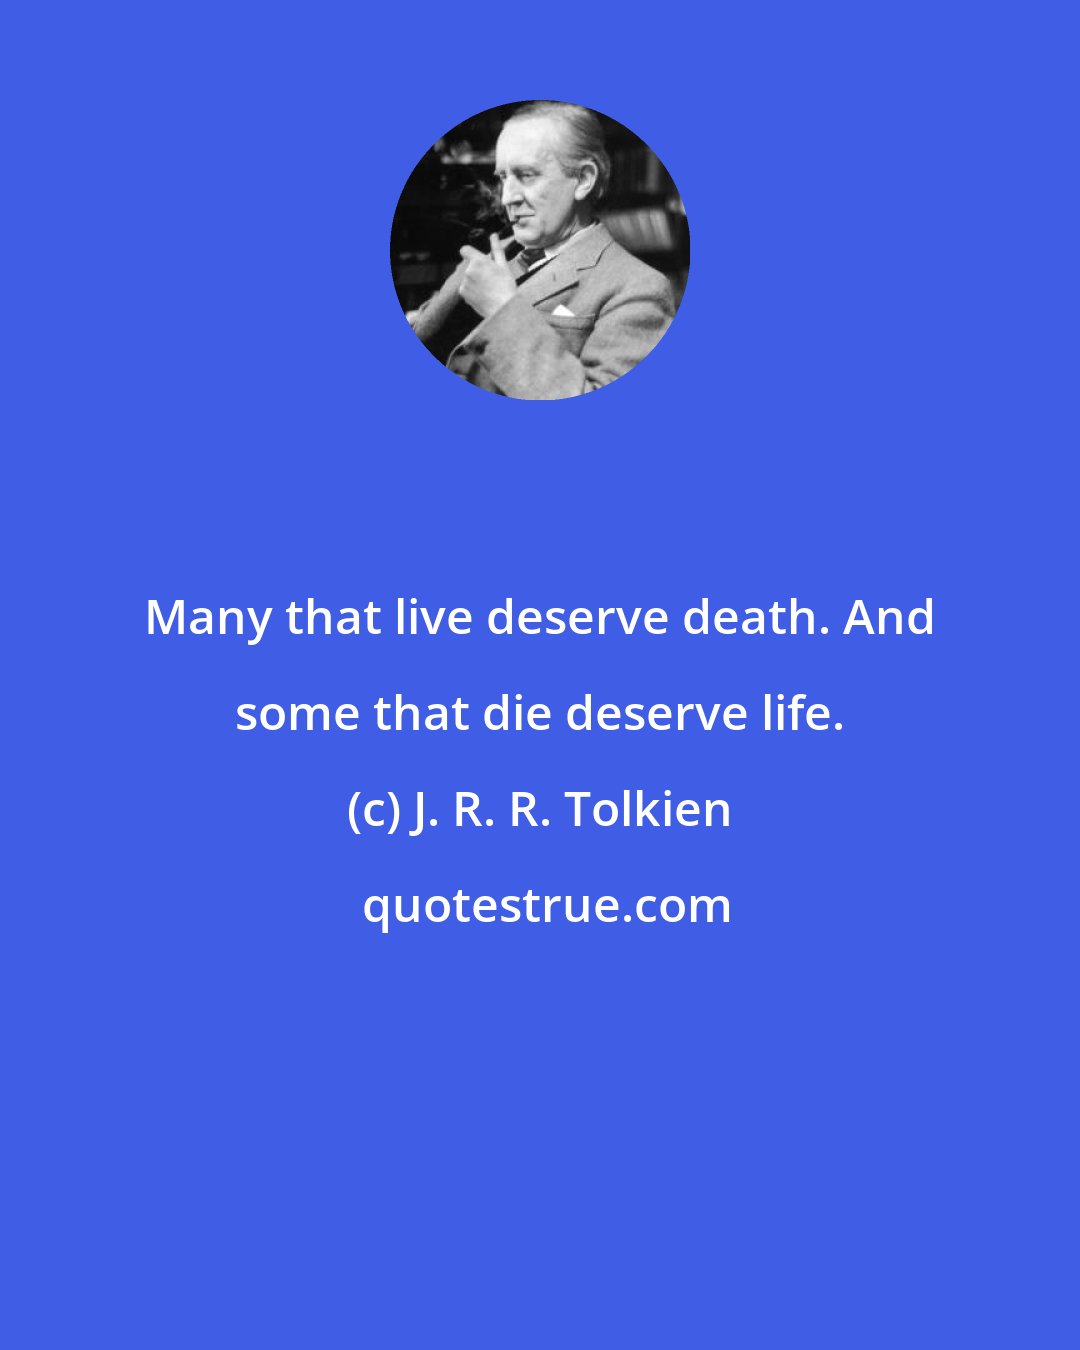 J. R. R. Tolkien: Many that live deserve death. And some that die deserve life.